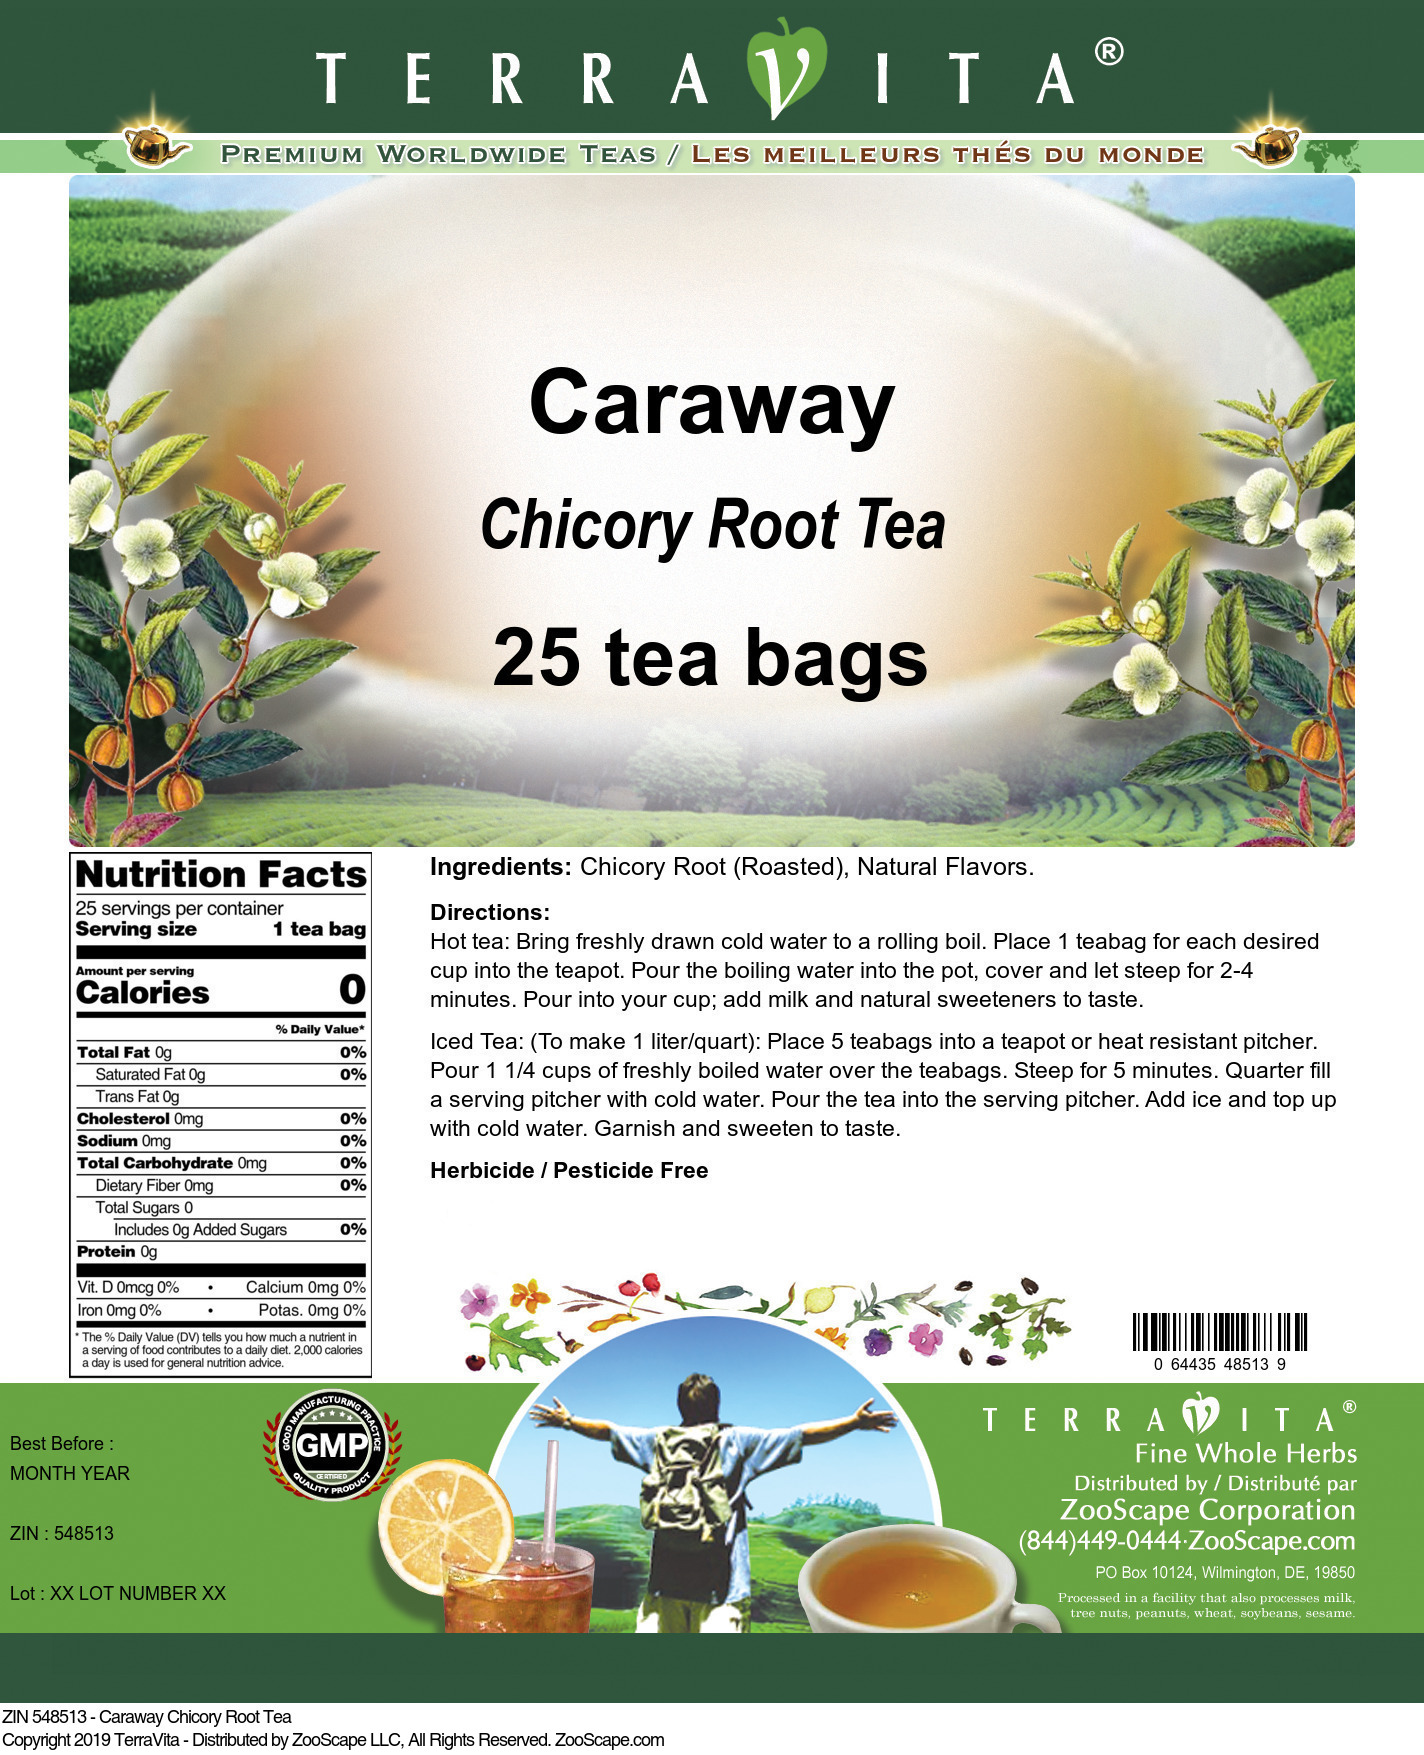 Caraway Chicory Root Tea - Label